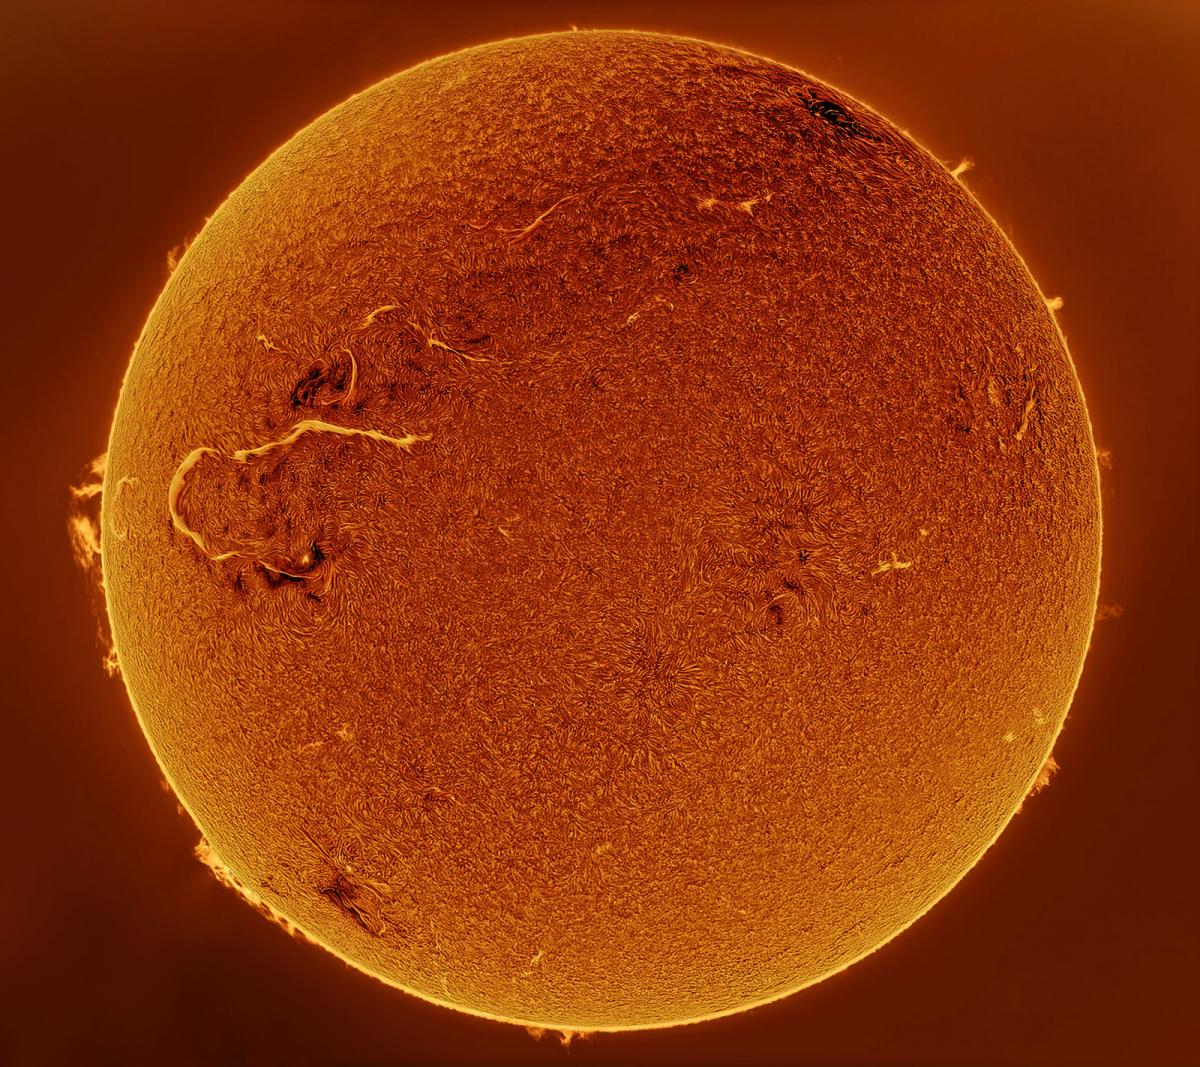 A telescope view of the Sun. The huge glowing orange orb almost fills the screen, and the detail allows you to see a huge solar flare arching out from the Sun's surface